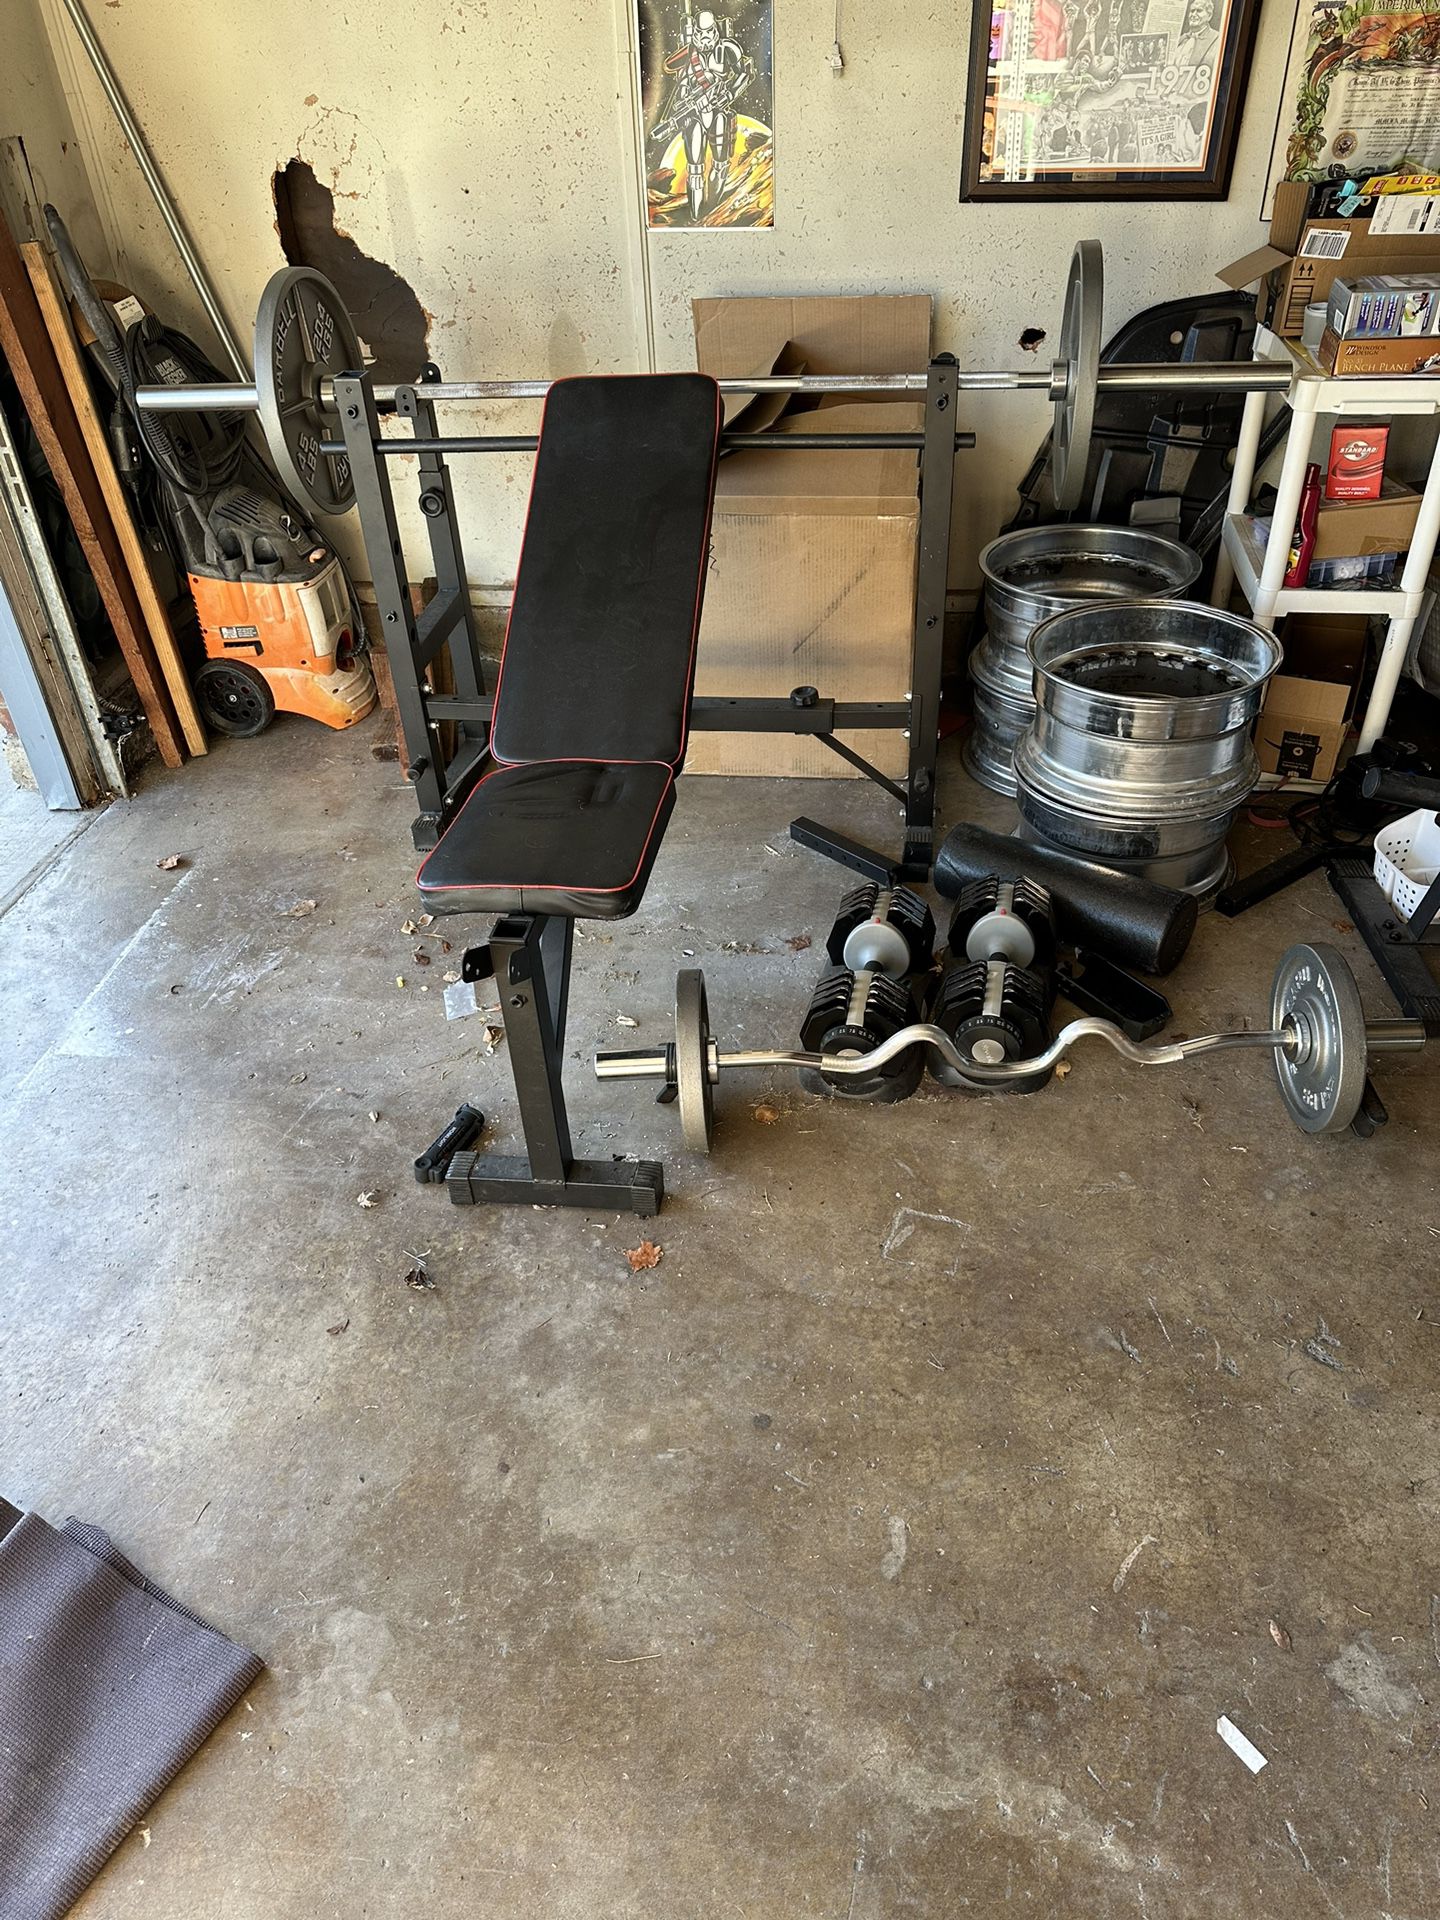 Olympic weight set with bench, curl bar, adjustable dumbbells